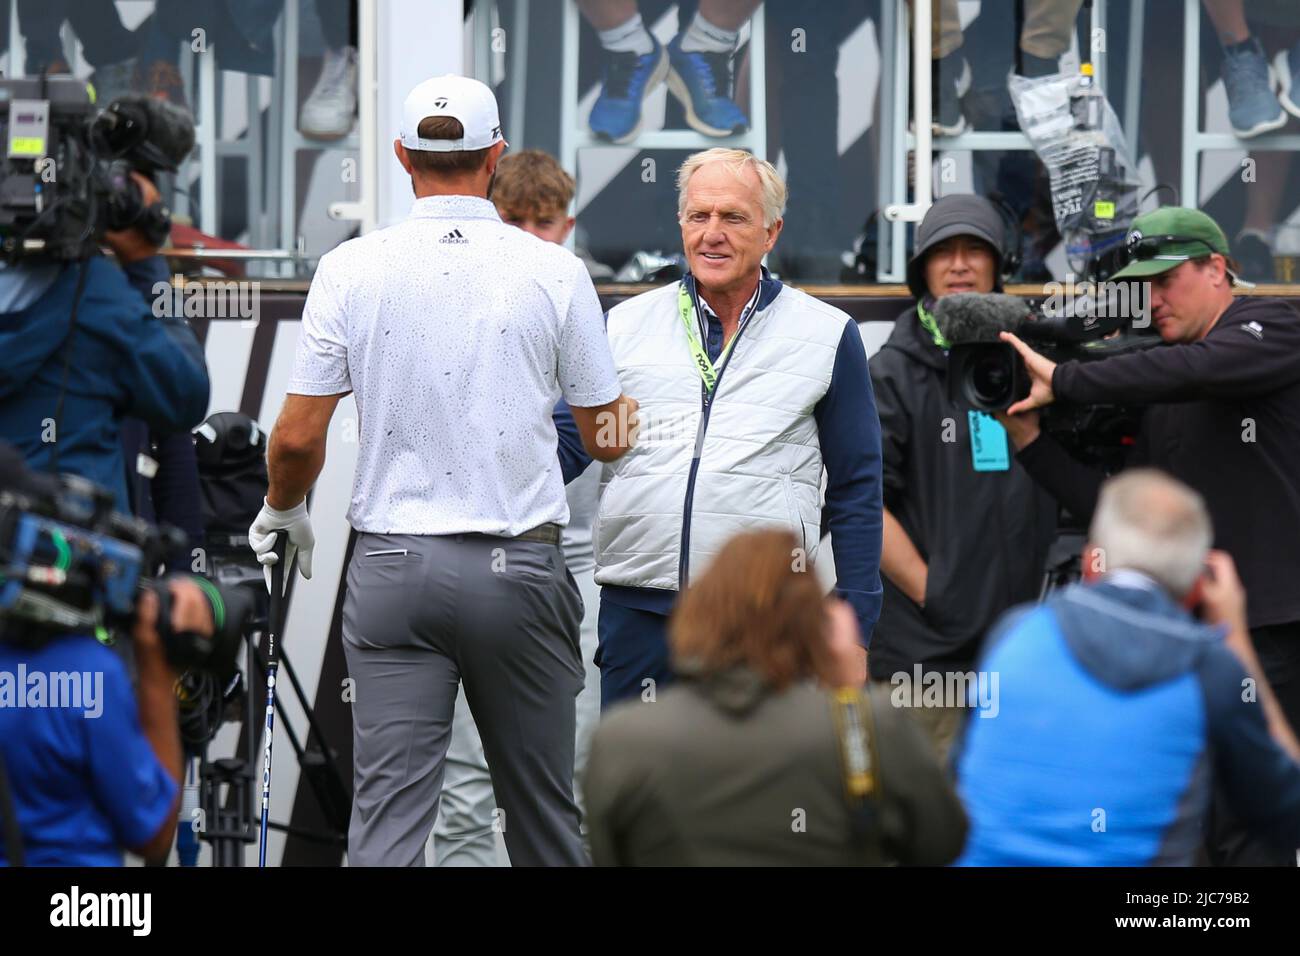 ST ALBANS, ENGLAND - JUNE 09: Greg Norman, LIV Golf CEO and Commissioner, embraces Dustin Johnson of the United States on the 1st tee during day one of the LIV Golf Invitational at The Centurion Club on June 9, 2022 in St Albans, England. (MB Media) Stock Photo